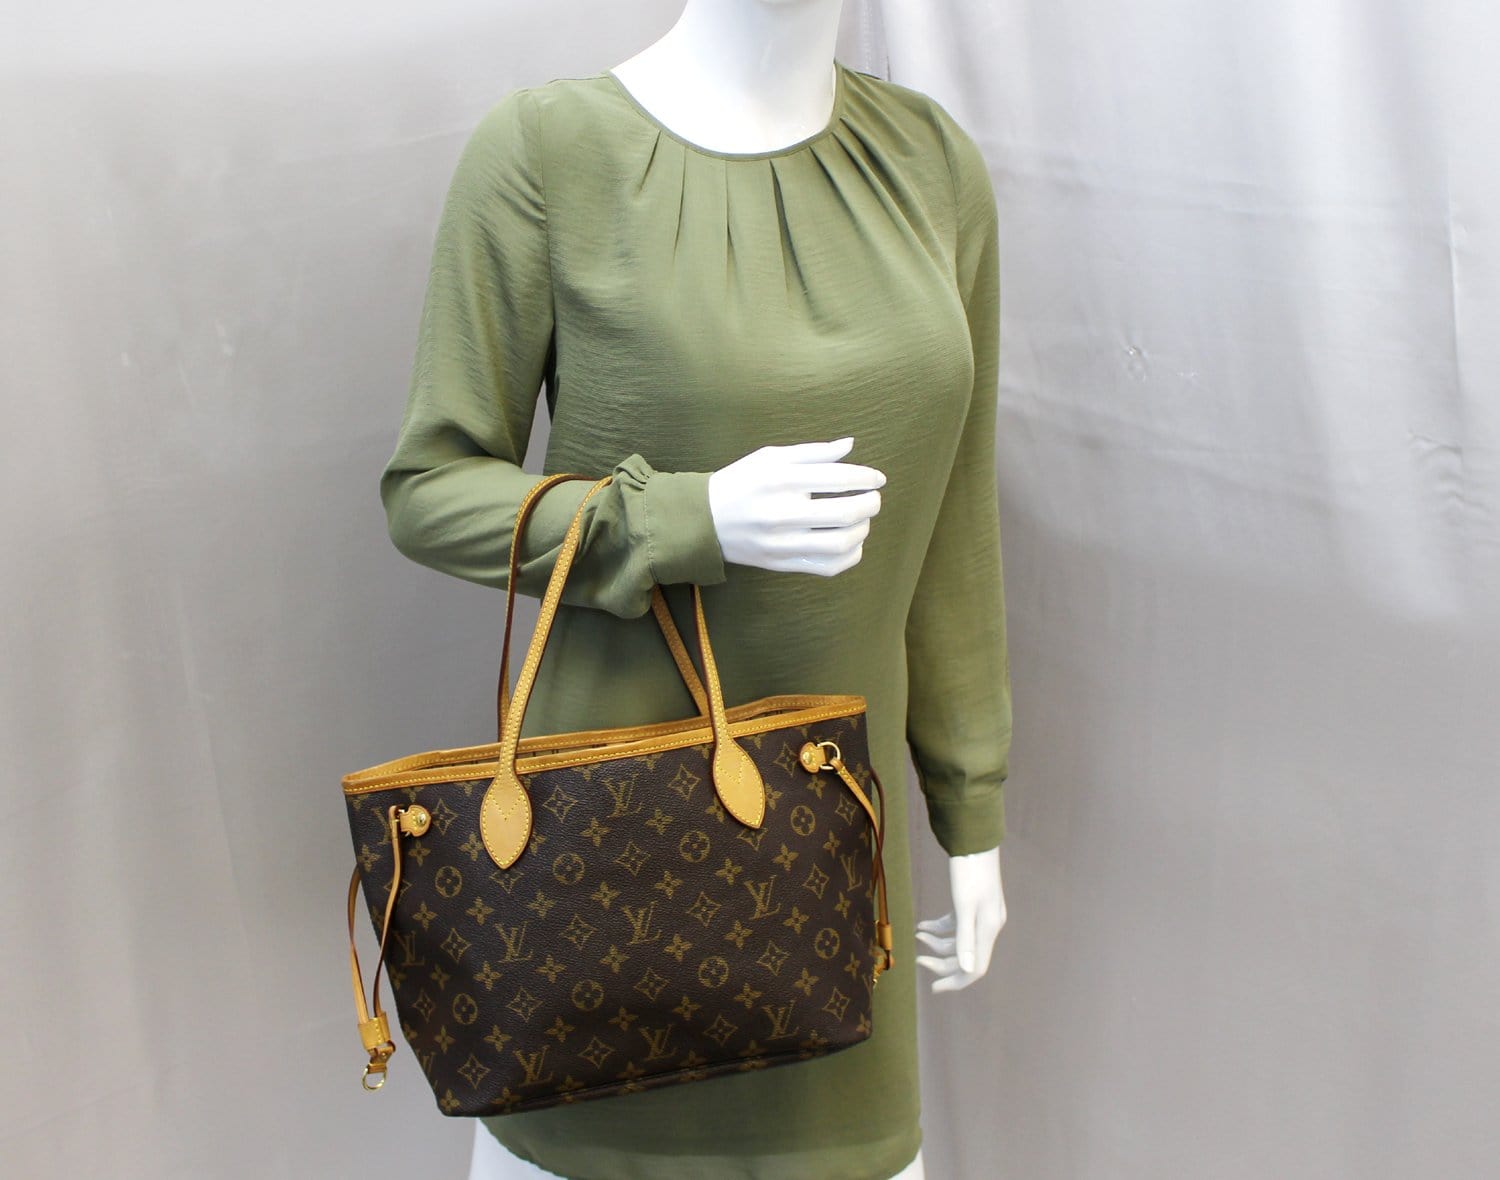 Louis Vuitton Small Monogram Neverfull PM Tote Bag Leather ref